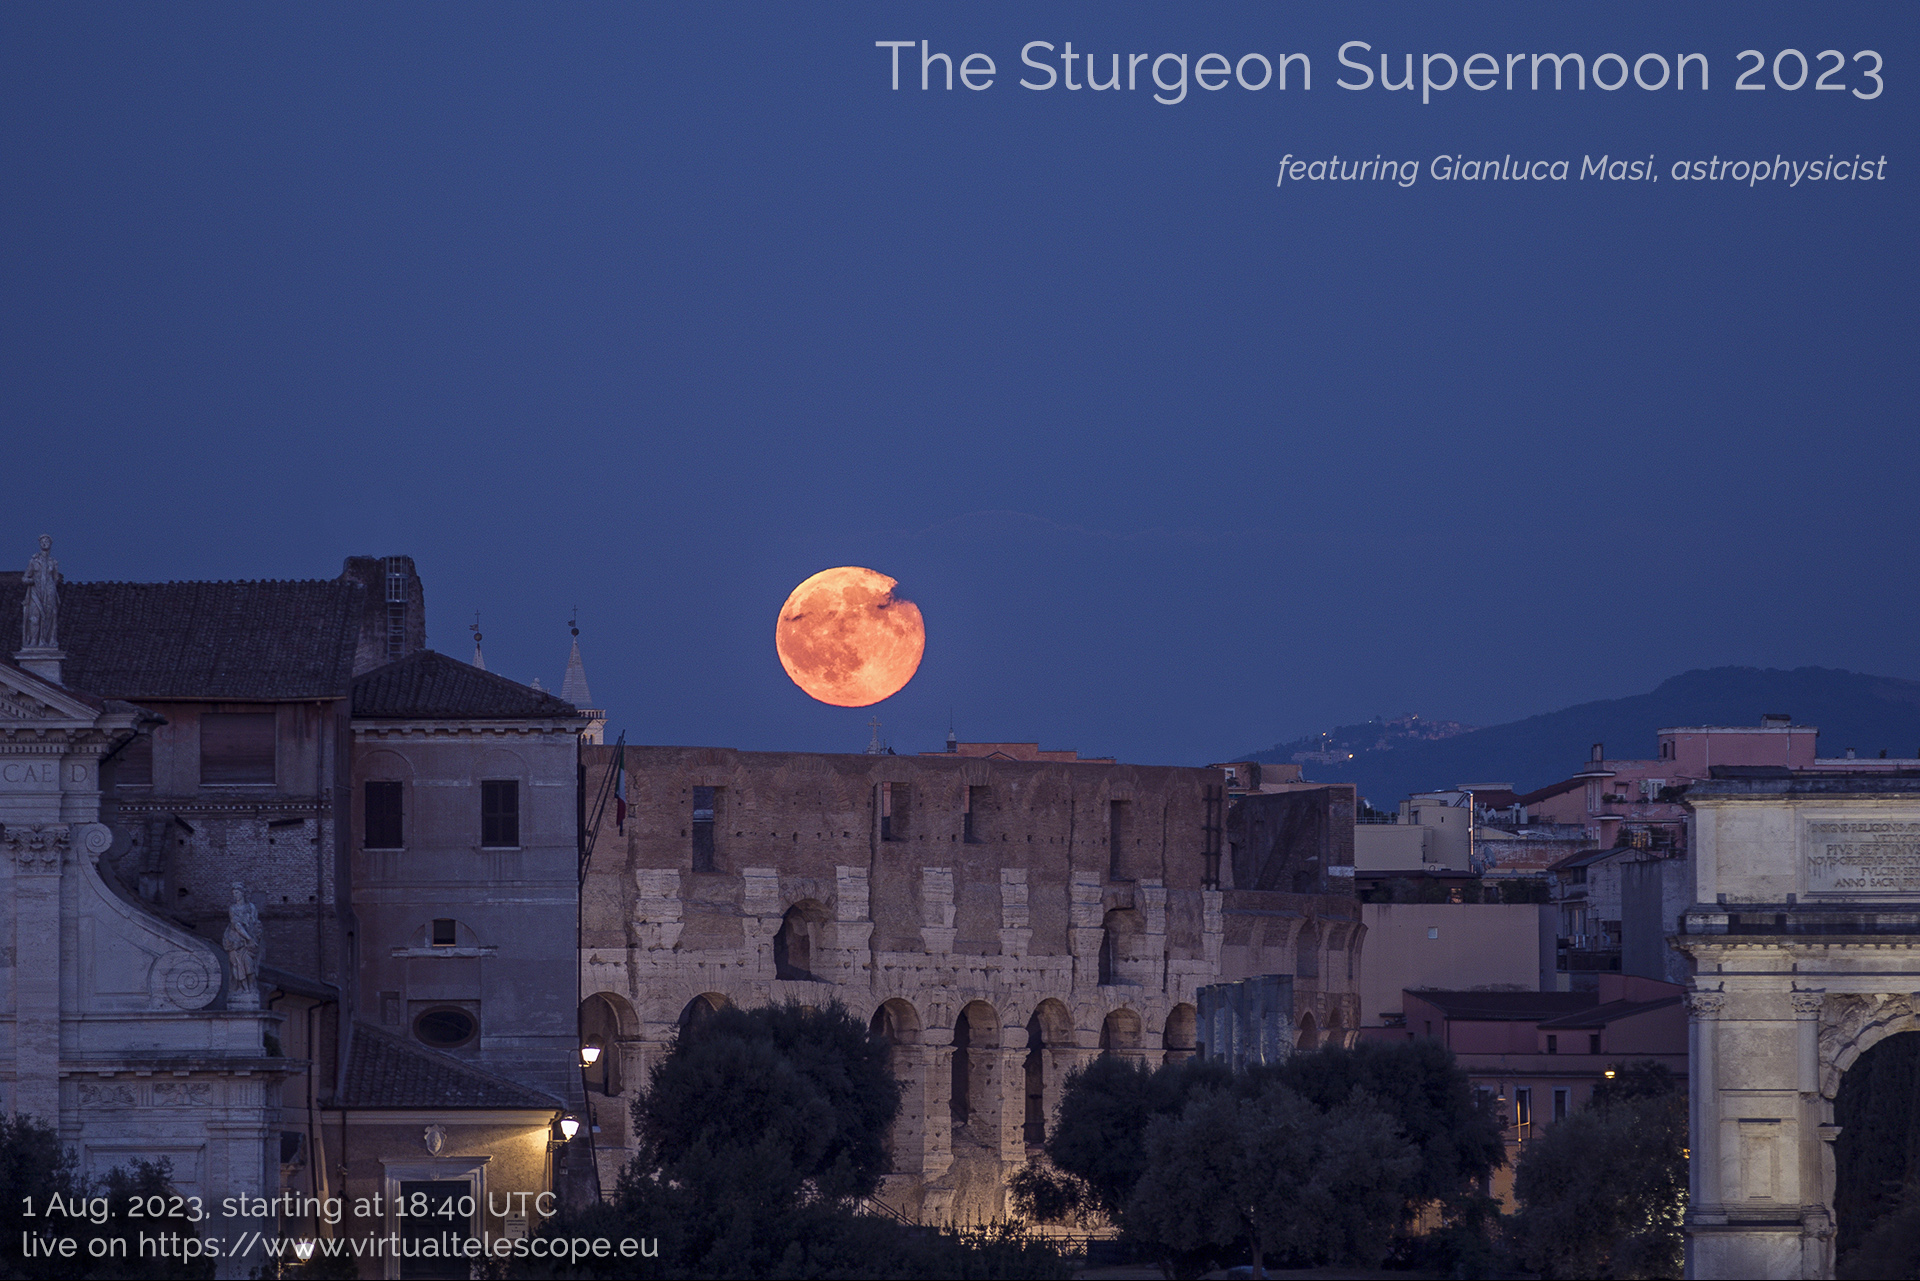 The Sturgeon Supermoon 2023: poster of the event.